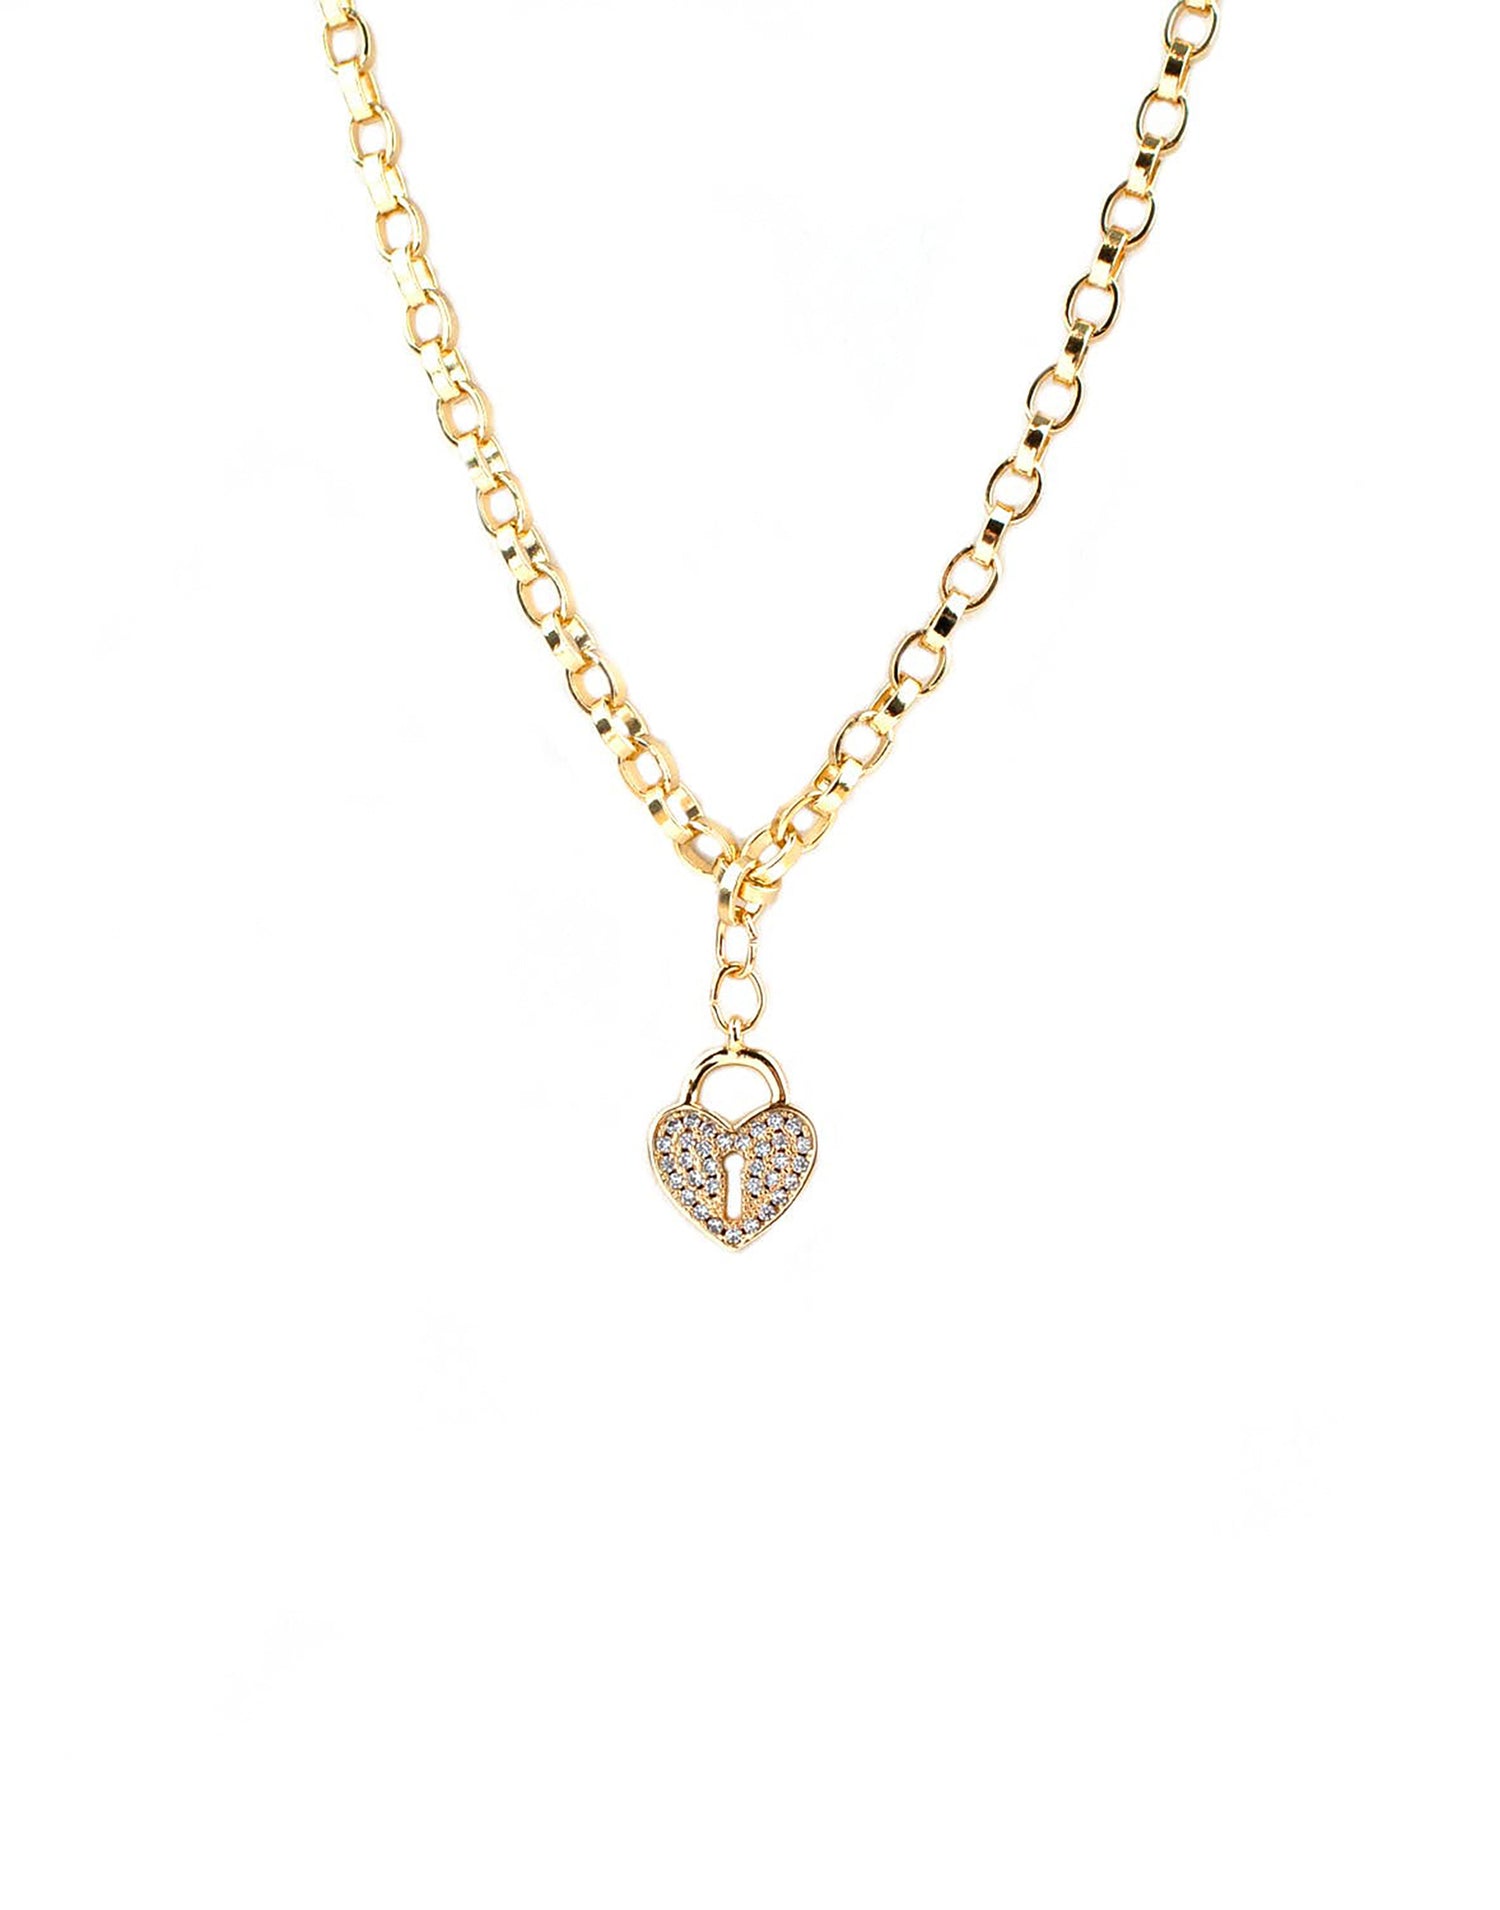 Pave Heart Necklace by Marlyn Schiff in Gold - Product View